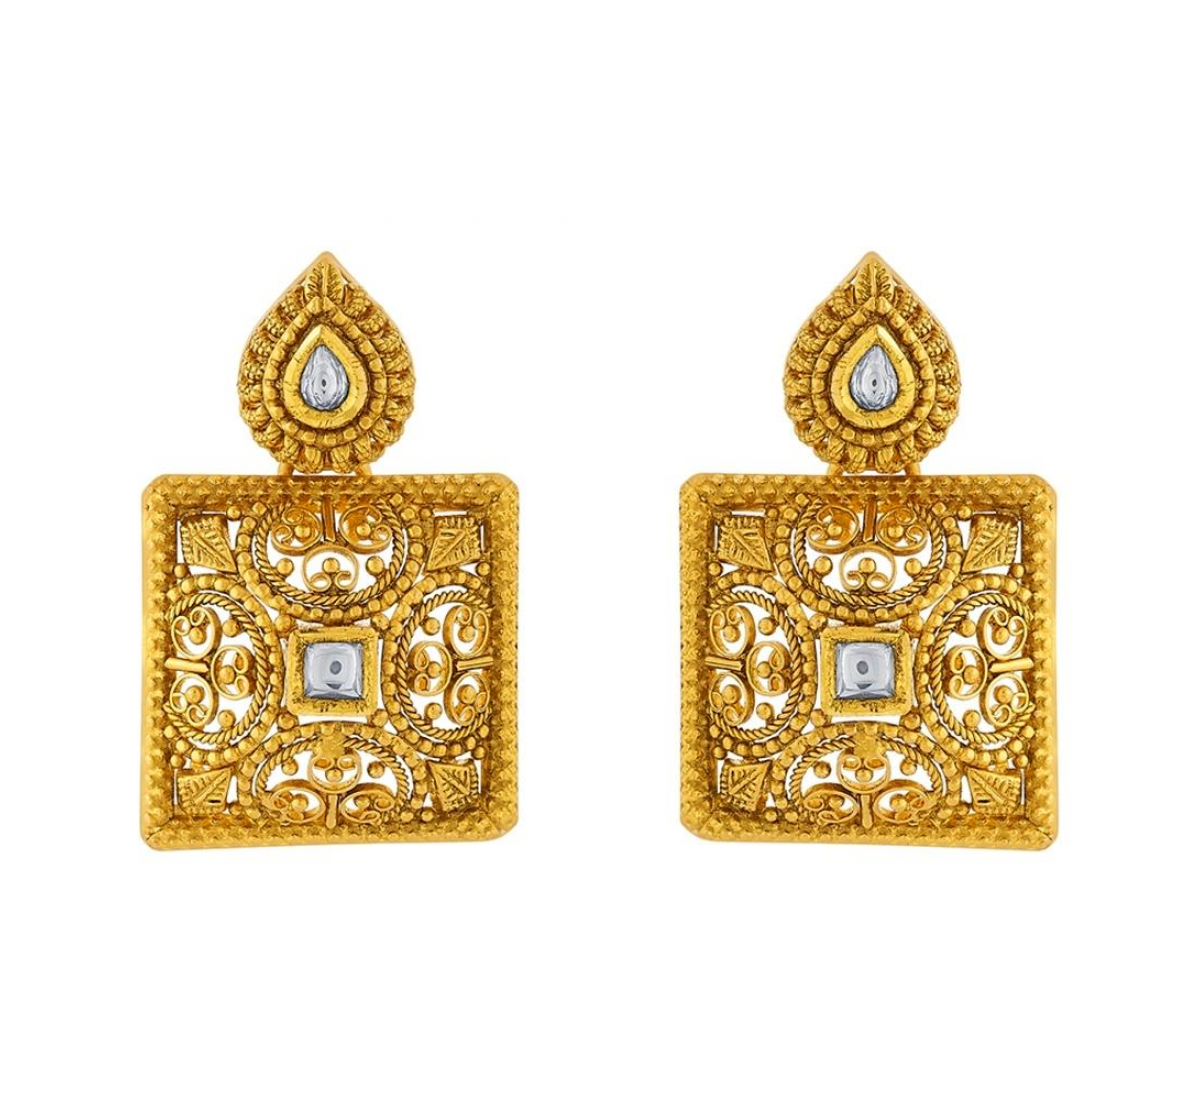 12 Latest Indian Earring Designs For Women – Pure Elegance